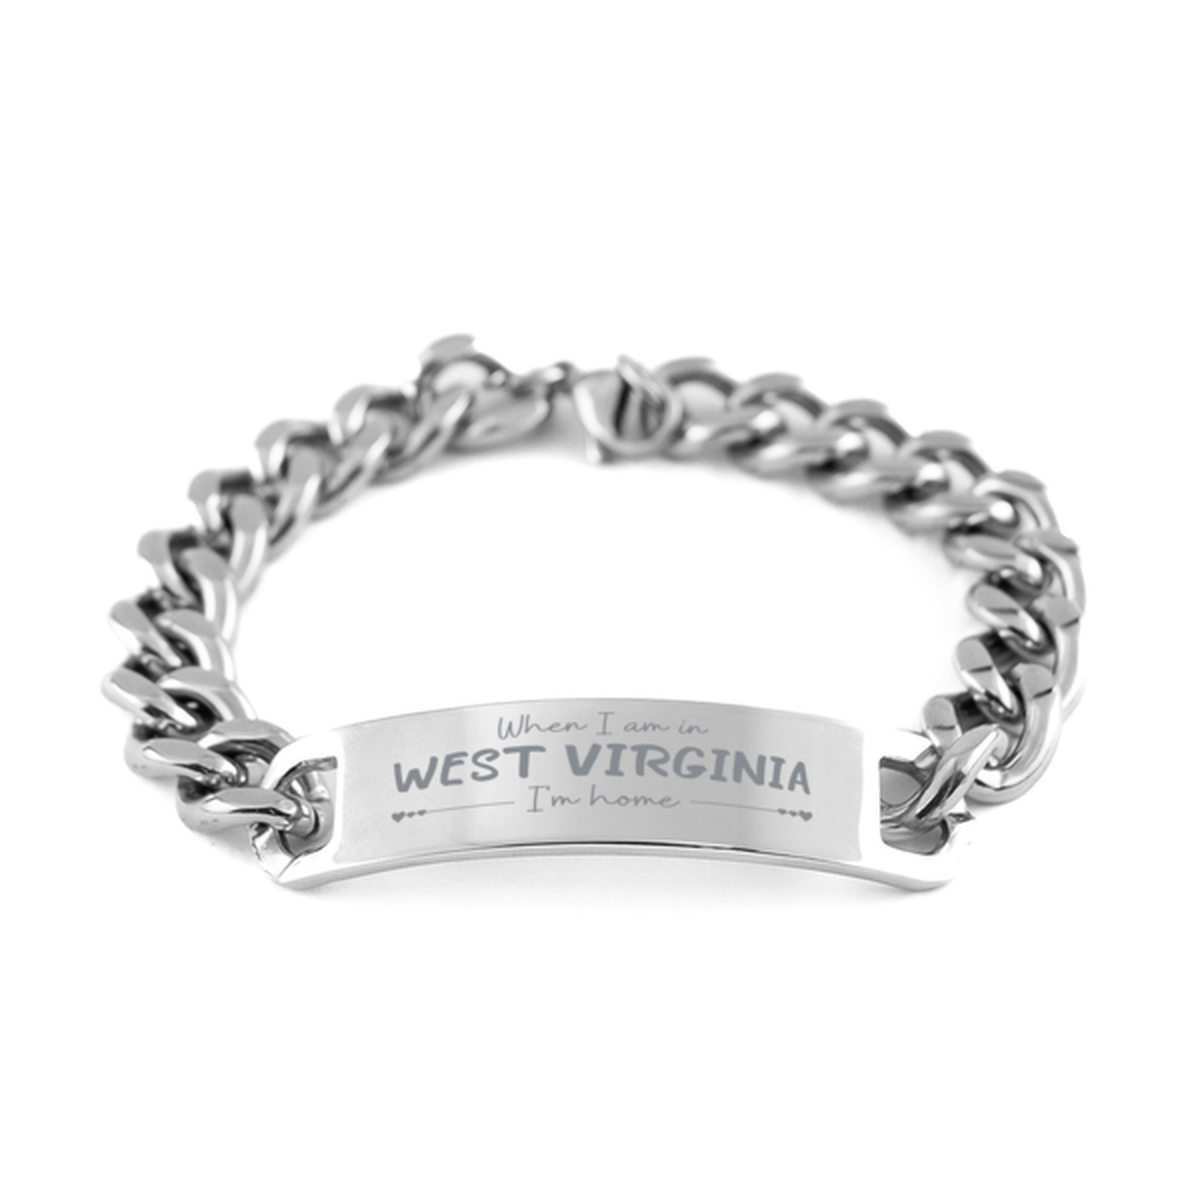 When I am in West Virginia I'm home Cuban Chain Stainless Steel Bracelet, Cheap Gifts For West Virginia, State West Virginia Birthday Gifts for Friends Coworker